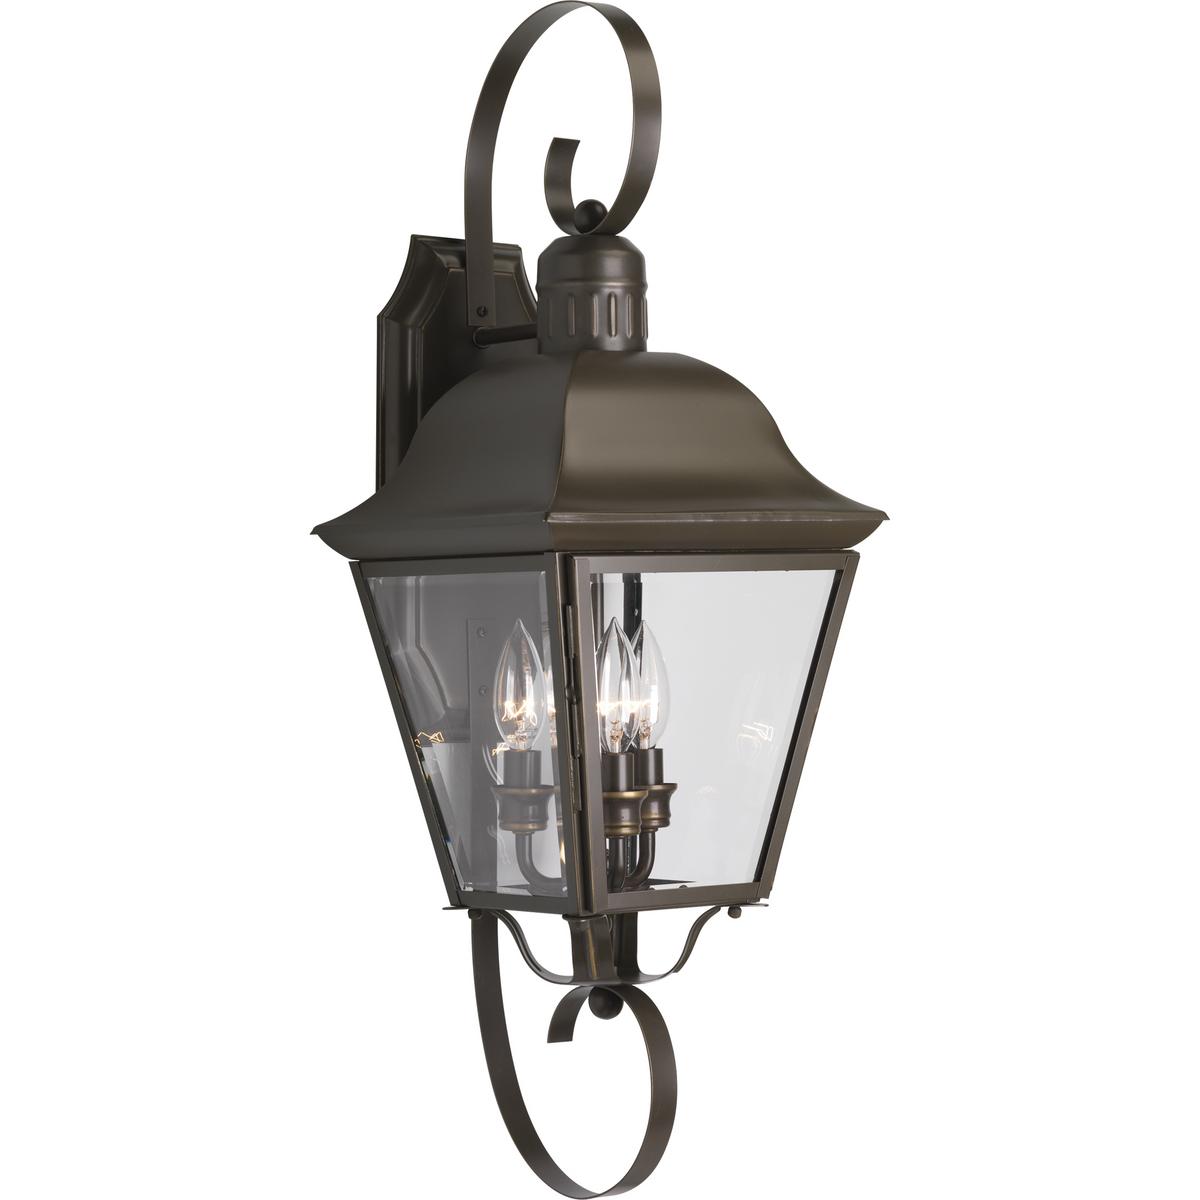 Hubbell P5689-20 The Andover collection three-light large wall lantern with aluminum construction, offers a mixture of traditional and country style for a variety of applications. Beveled glass panels allow optimum brightness. Hinged door for easy relamping.  ; A mixture 